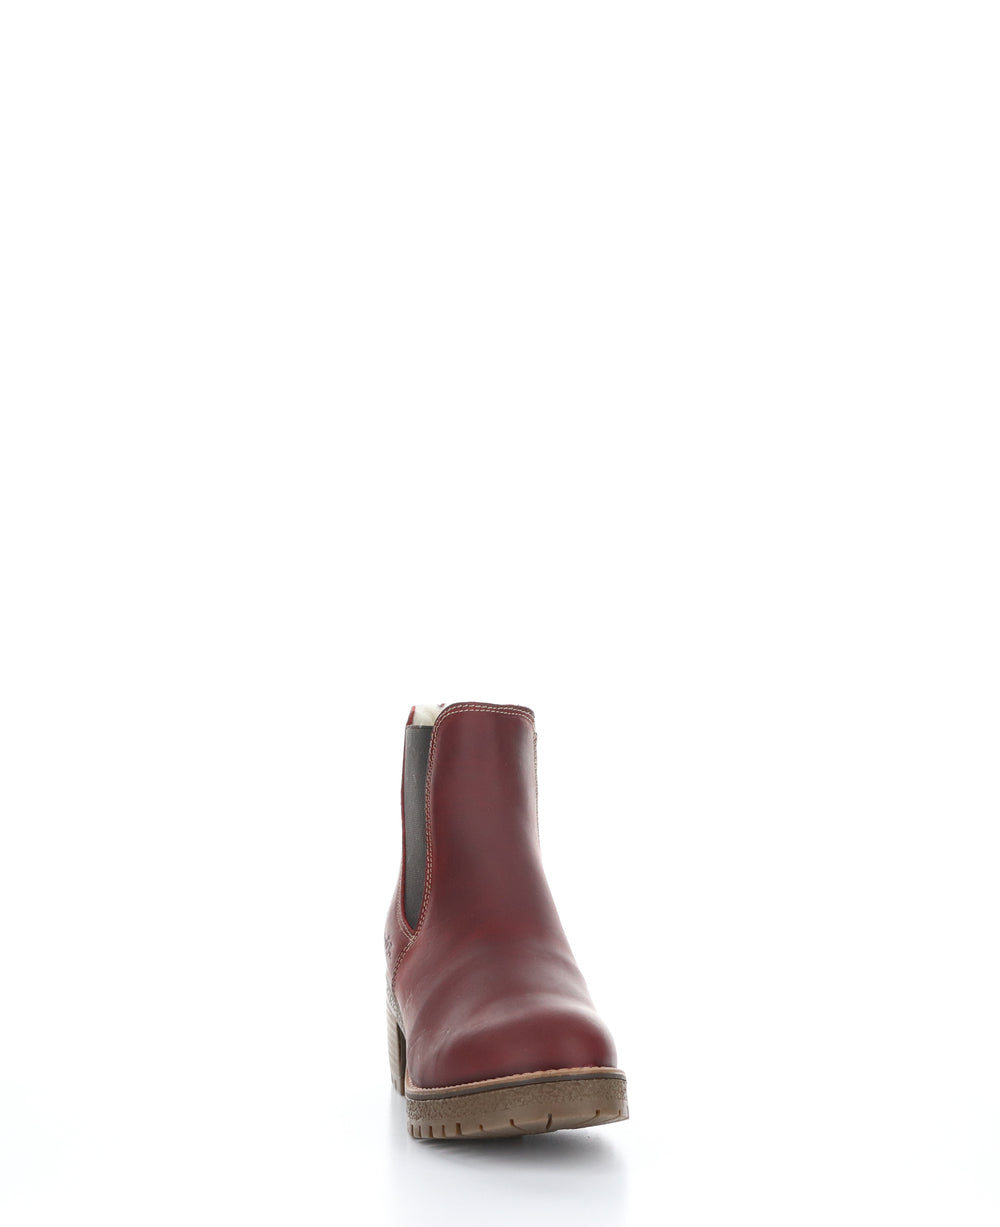 MASI Red/Dark Brown Zip Up Ankle Boots|MASI Bottines avec Fermeture Zippée in Rouge